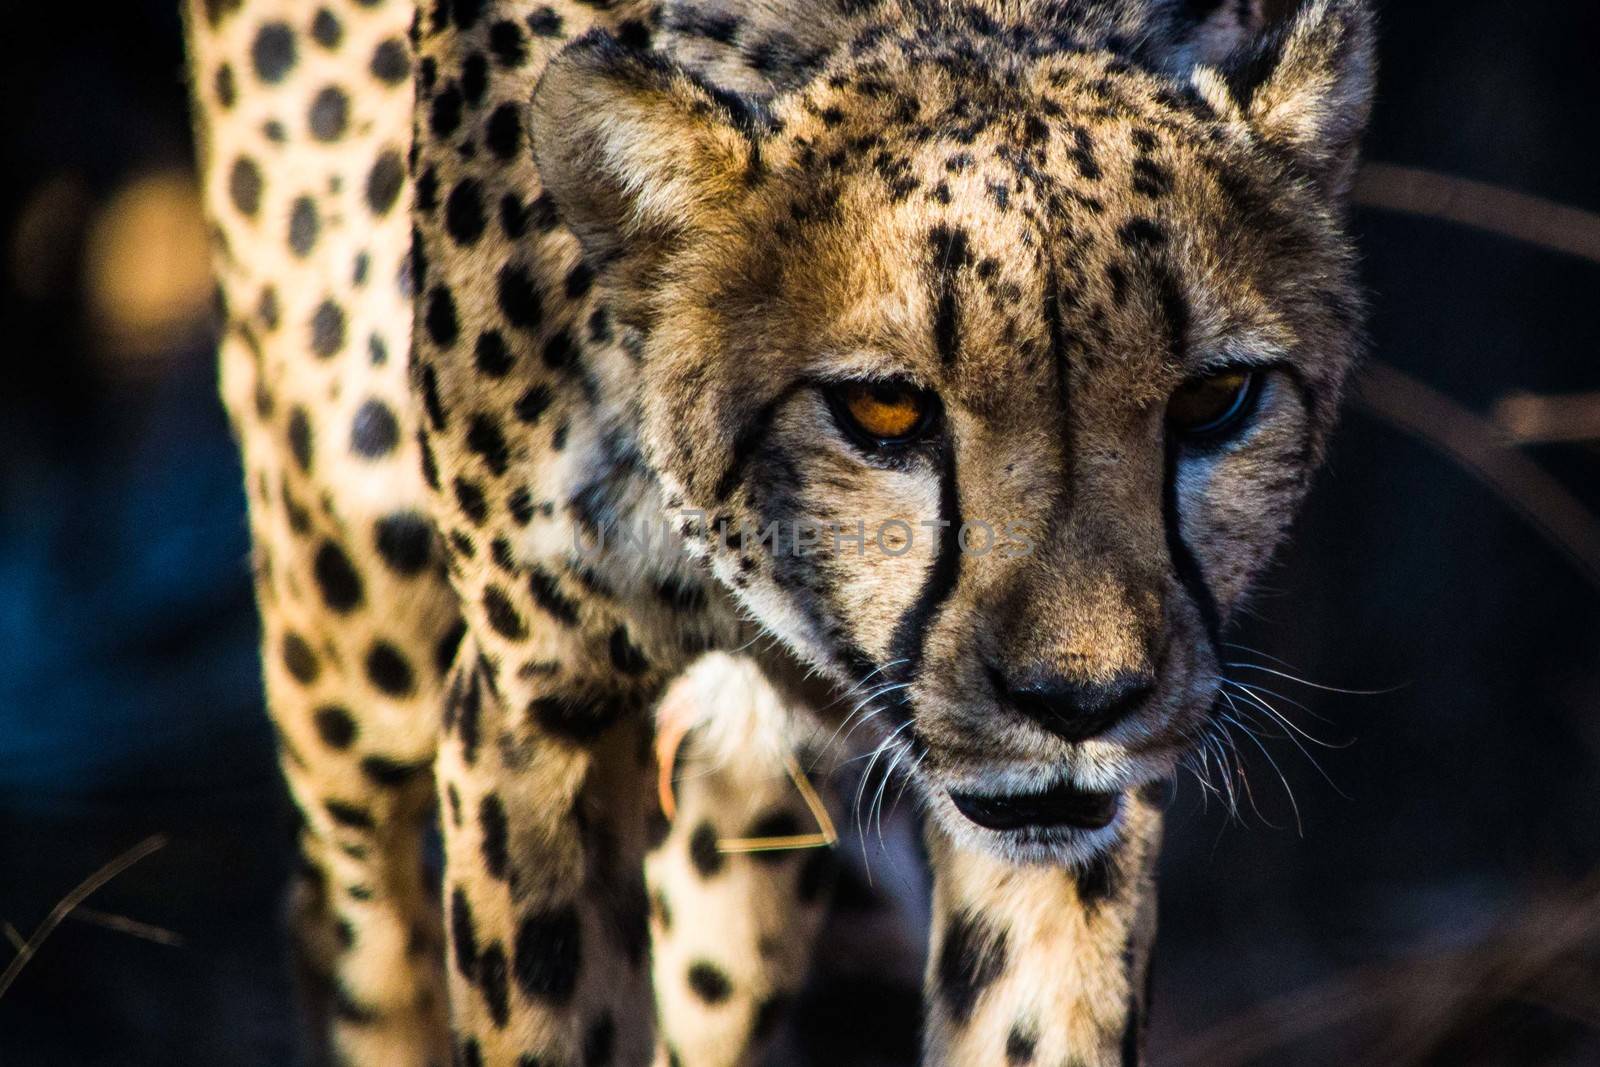 close-up encounter of a walking and alerted, concentrated cheetah during a safari trip in Africa